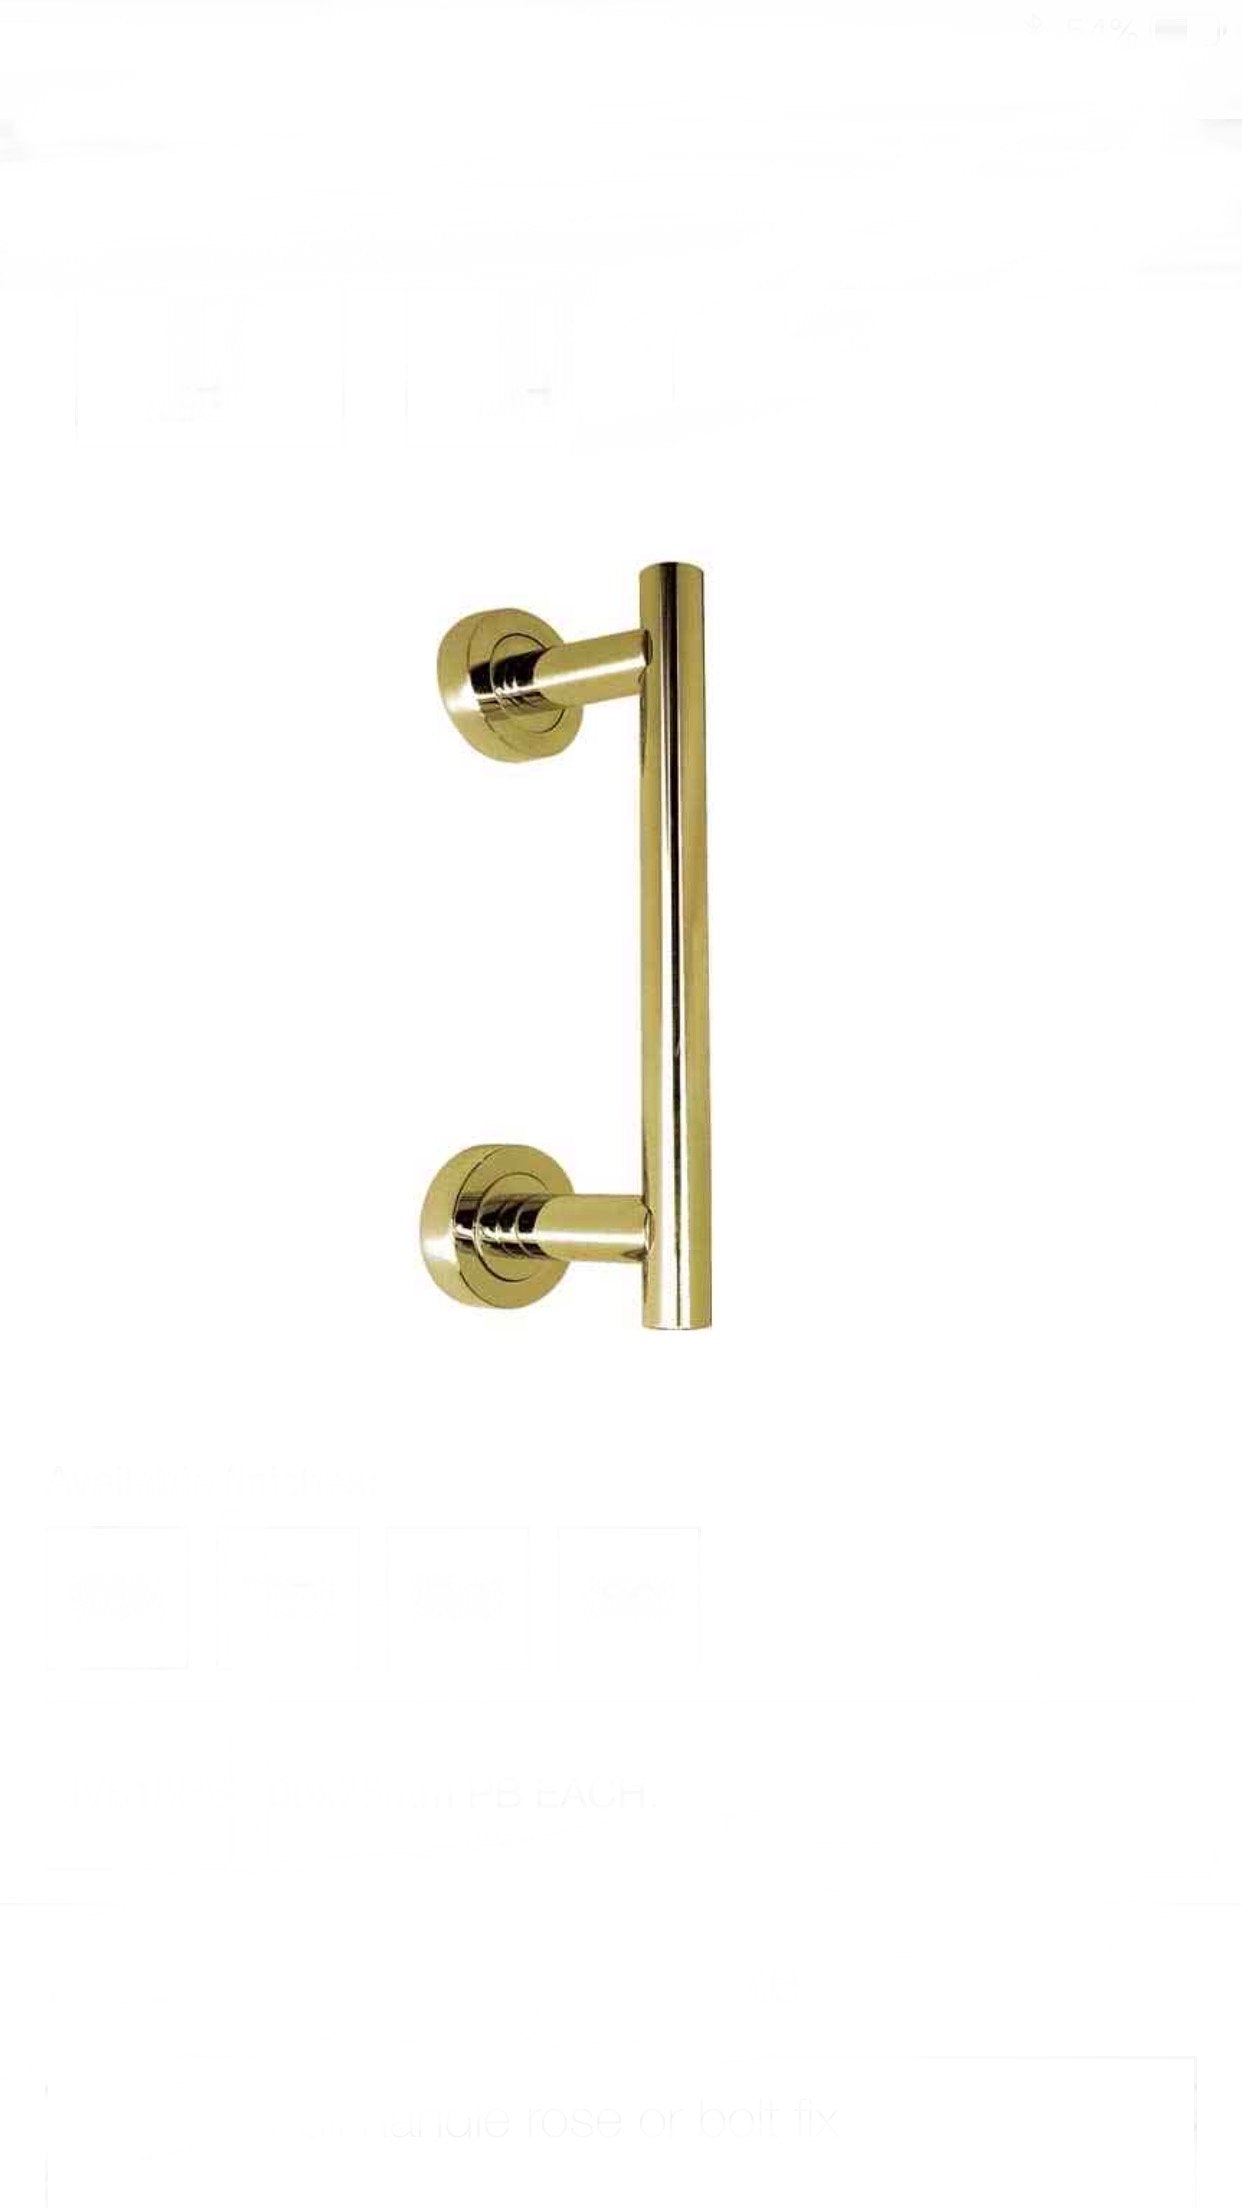 Polished brass pull handle